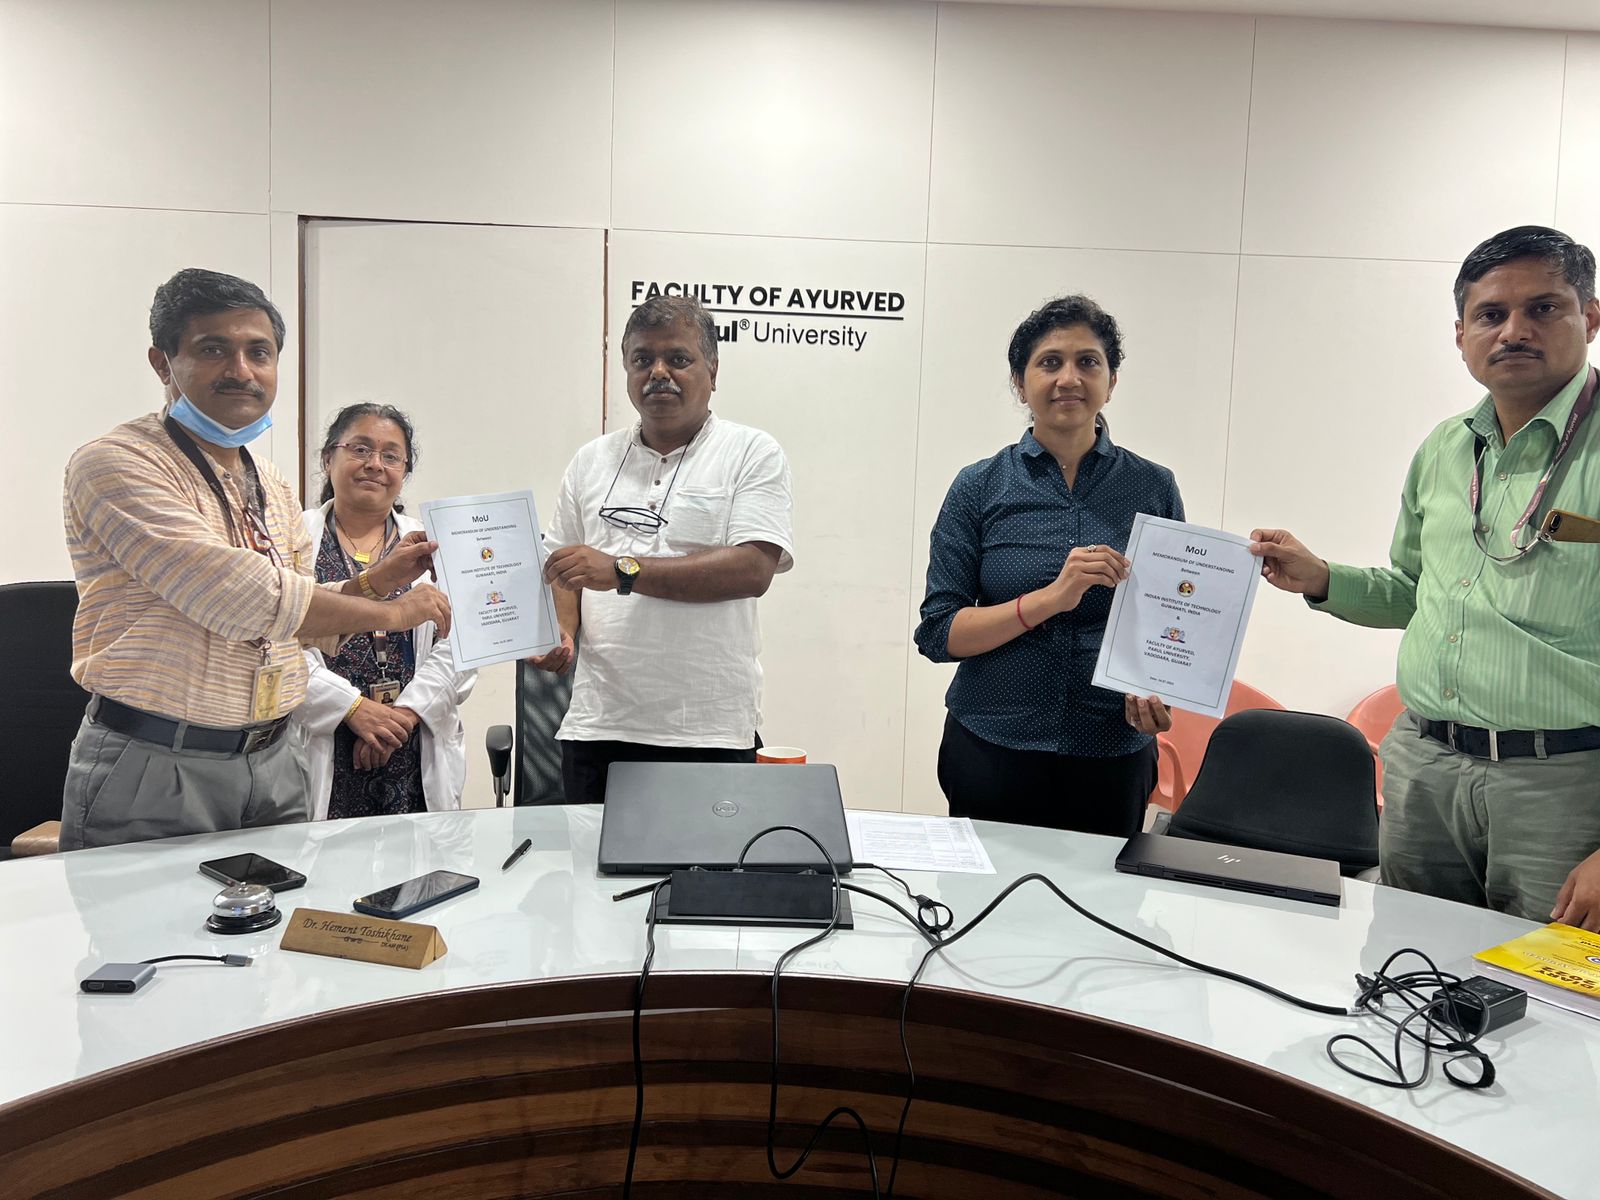 IIT Guwahati and PU sign an MoU to advance the scope of healthcare through leading ayurvedic research